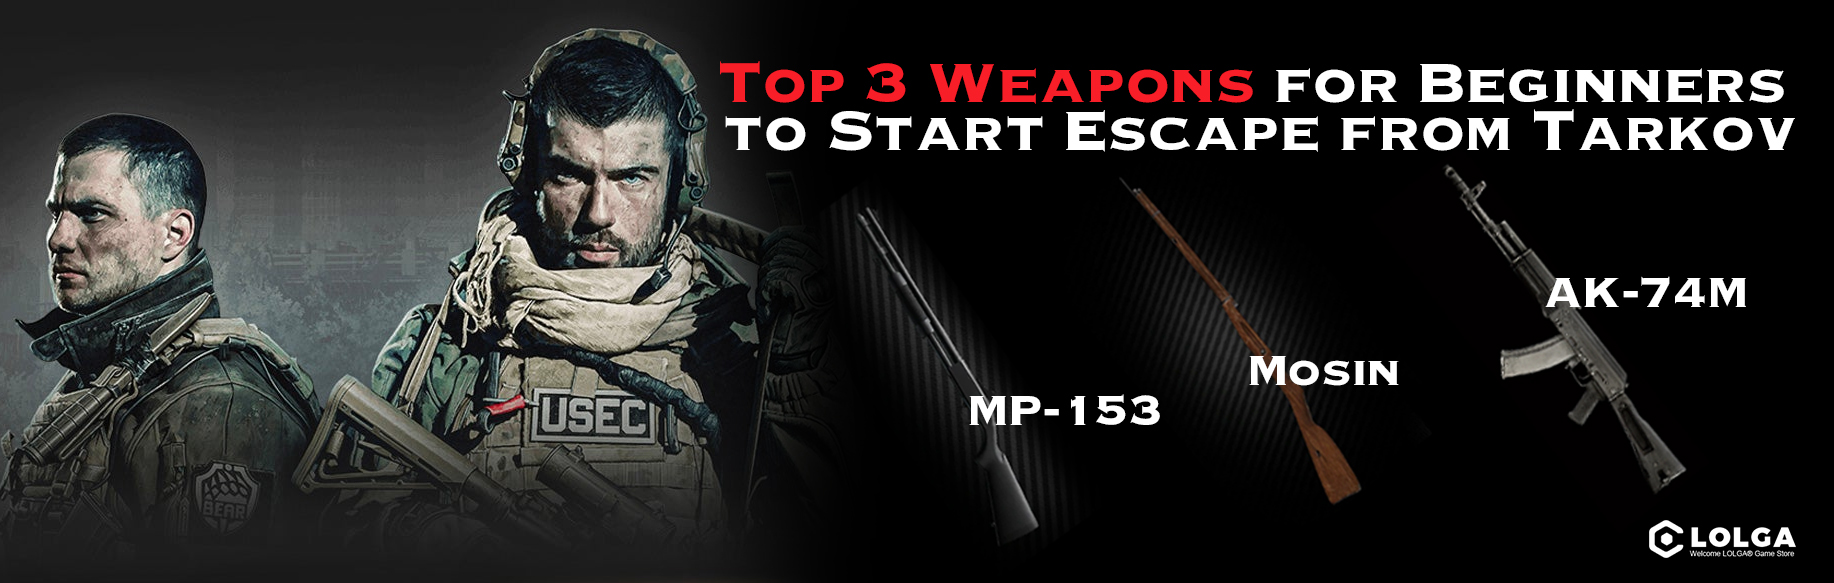 Top 3 Weapons for Beginners to Start Escape from Tarkov